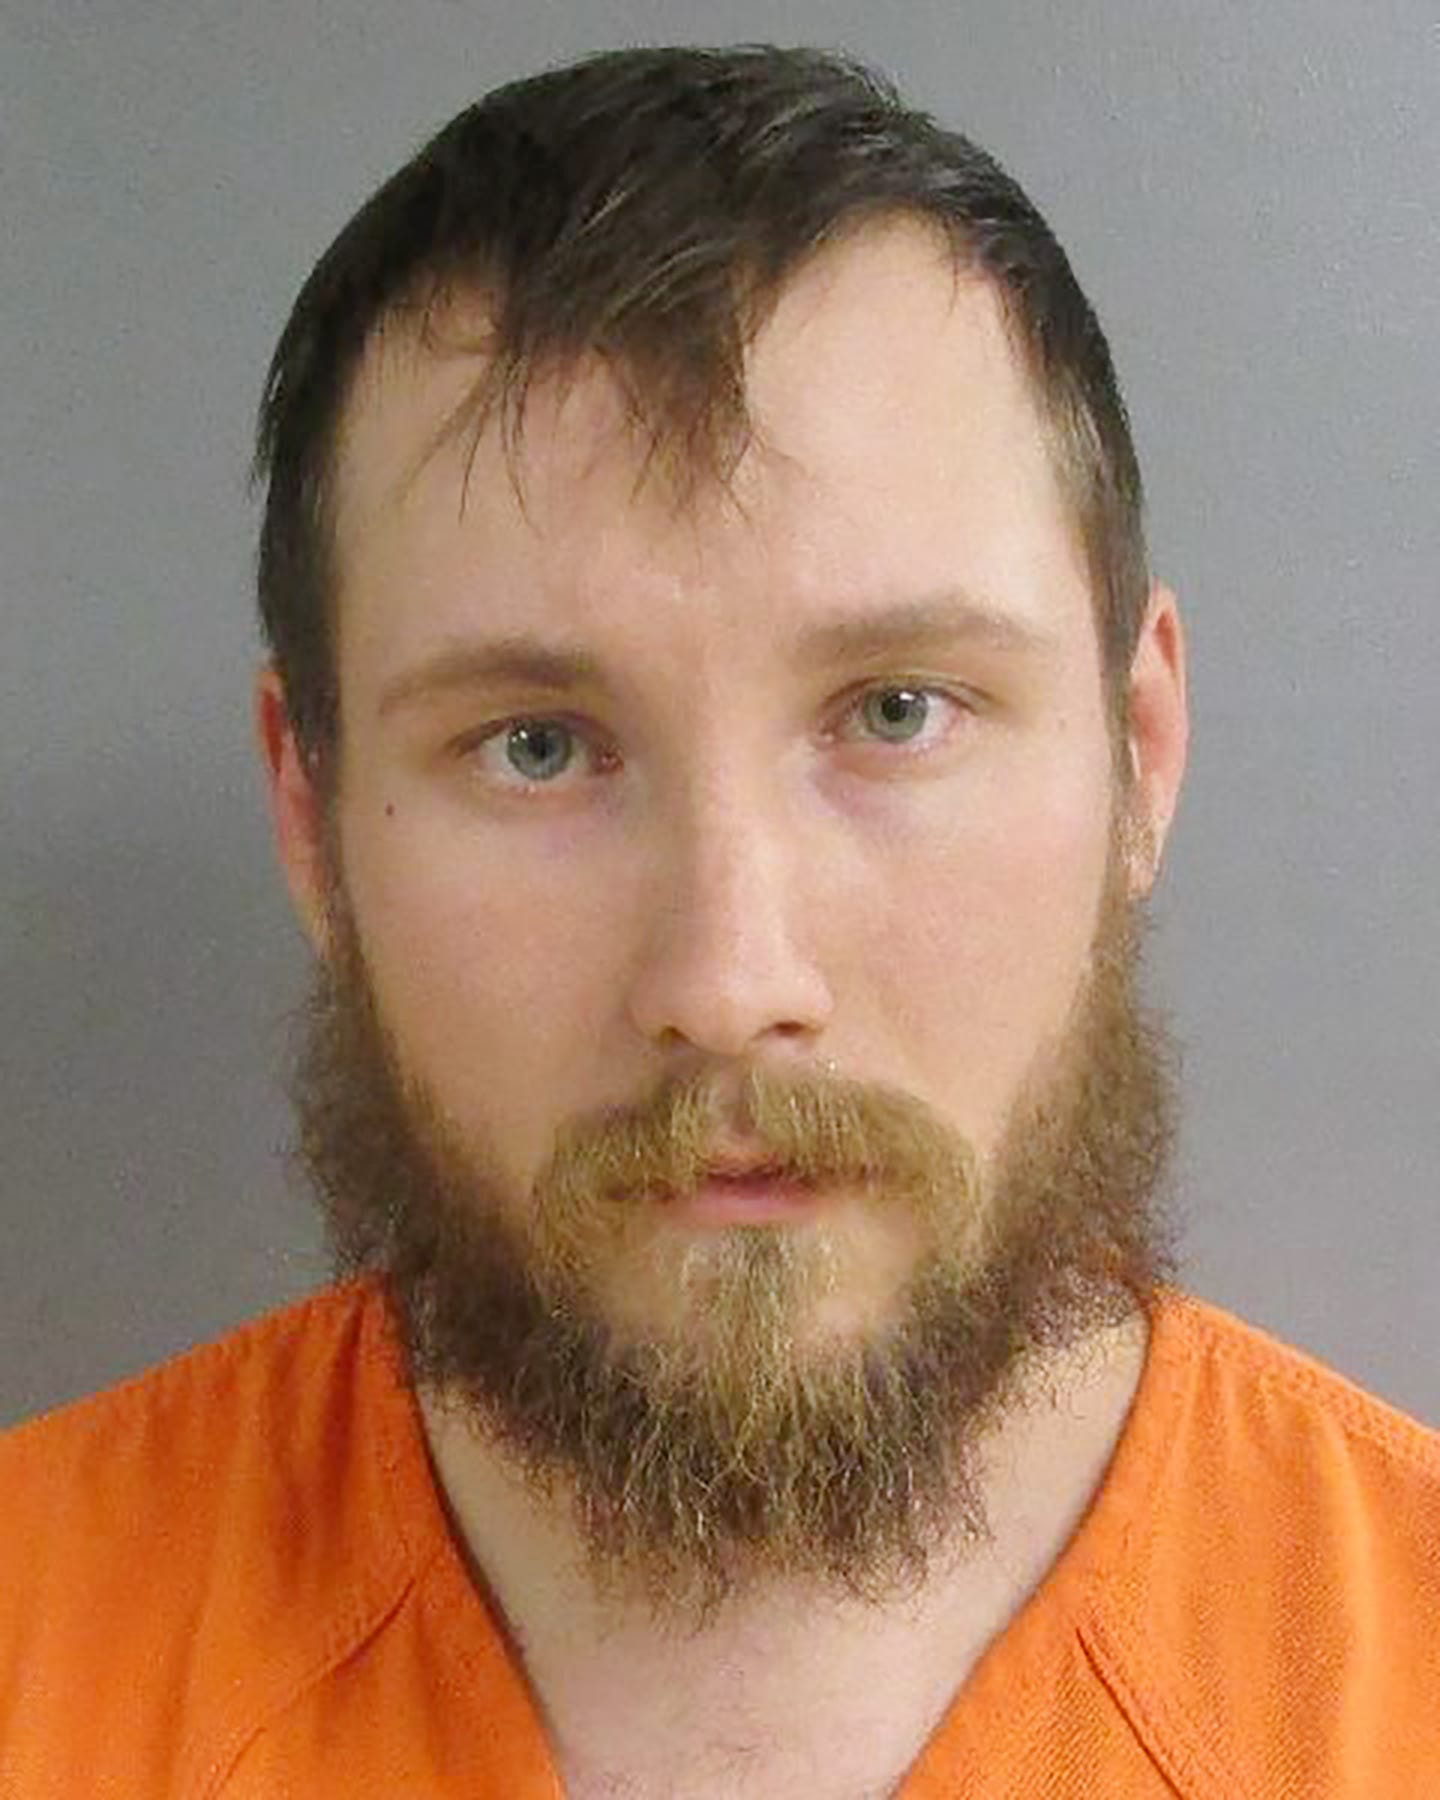 Joseph Morrison, 26 was arraigned Oct. 8, 2020, in connection with an alleged plot to kidnap and kill Gov. Gretchen Whitmer.